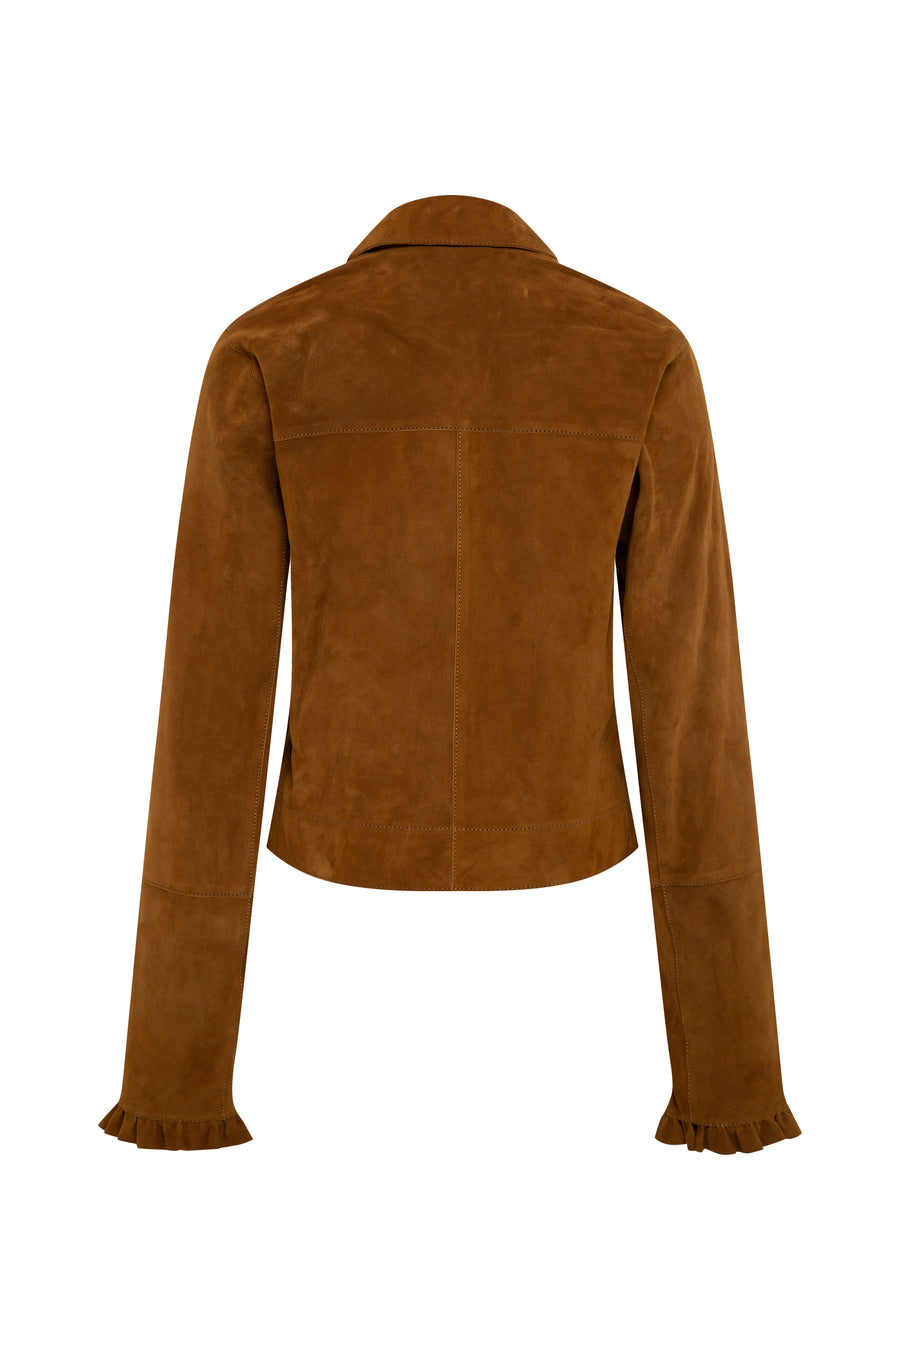 ARIL - Frill detailed suede jacket